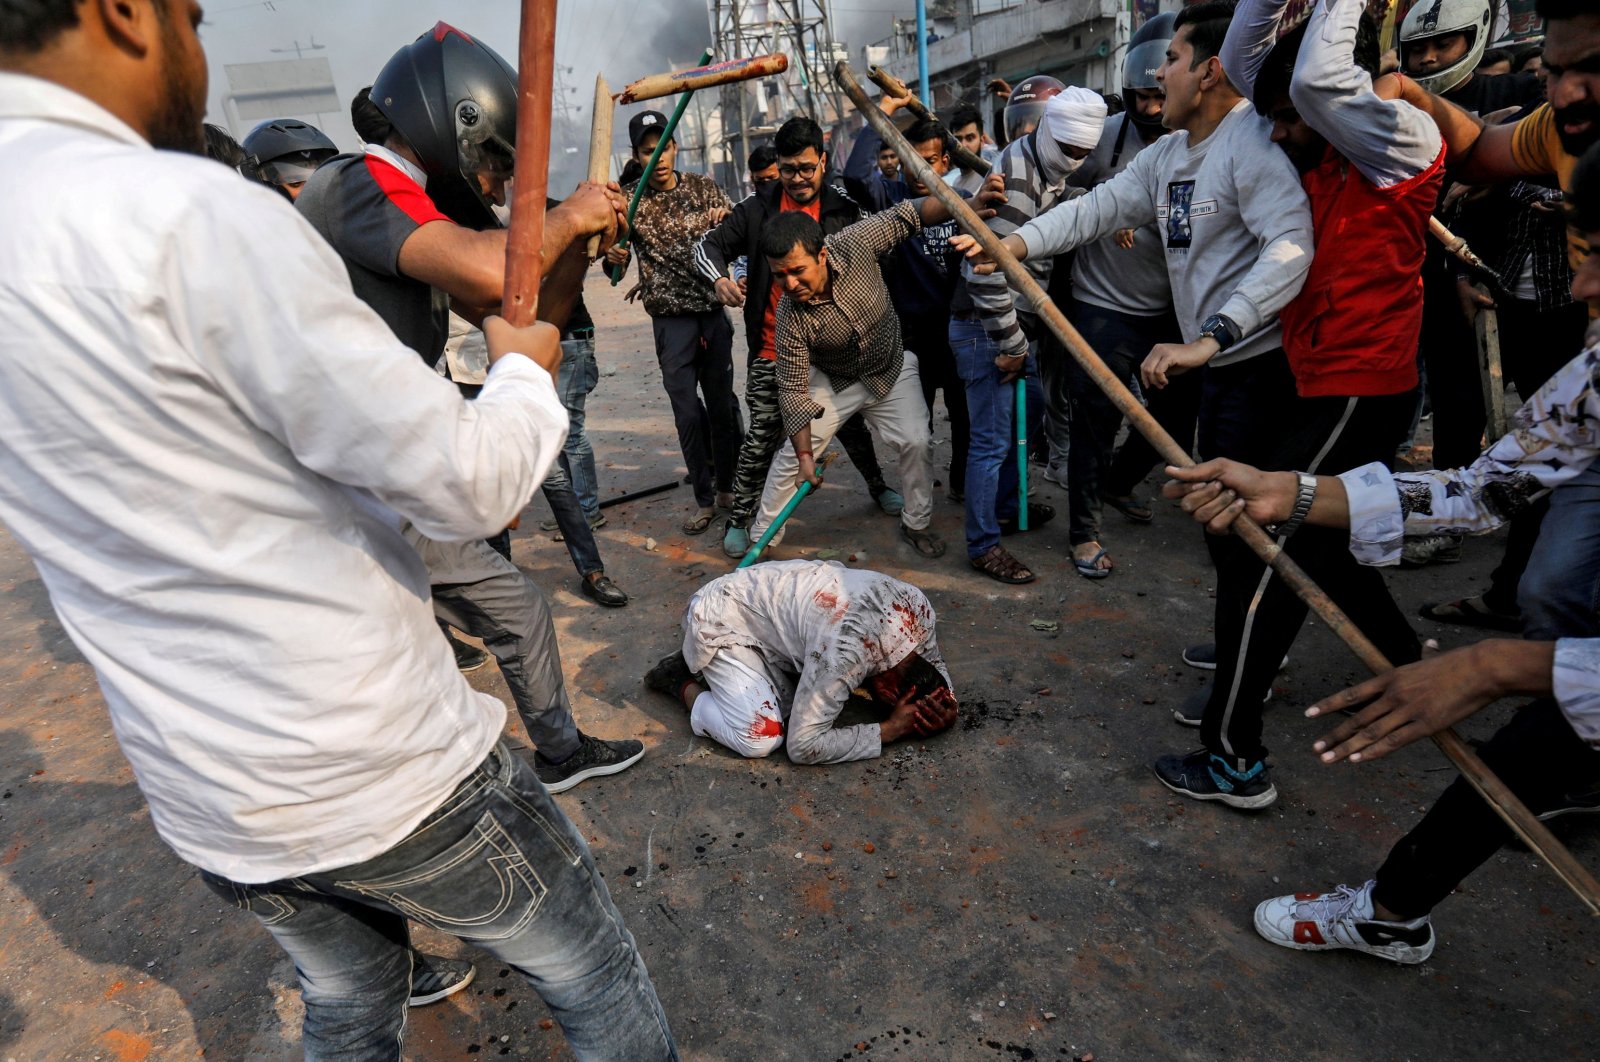 A group of men chanting pro-Hindu slogans beats Mohammad Zubair (C), 37, who is Muslim, during protests sparked by a new citizenship law in New Delhi, India, Feb. 24, 2020. (Reuters Photo)